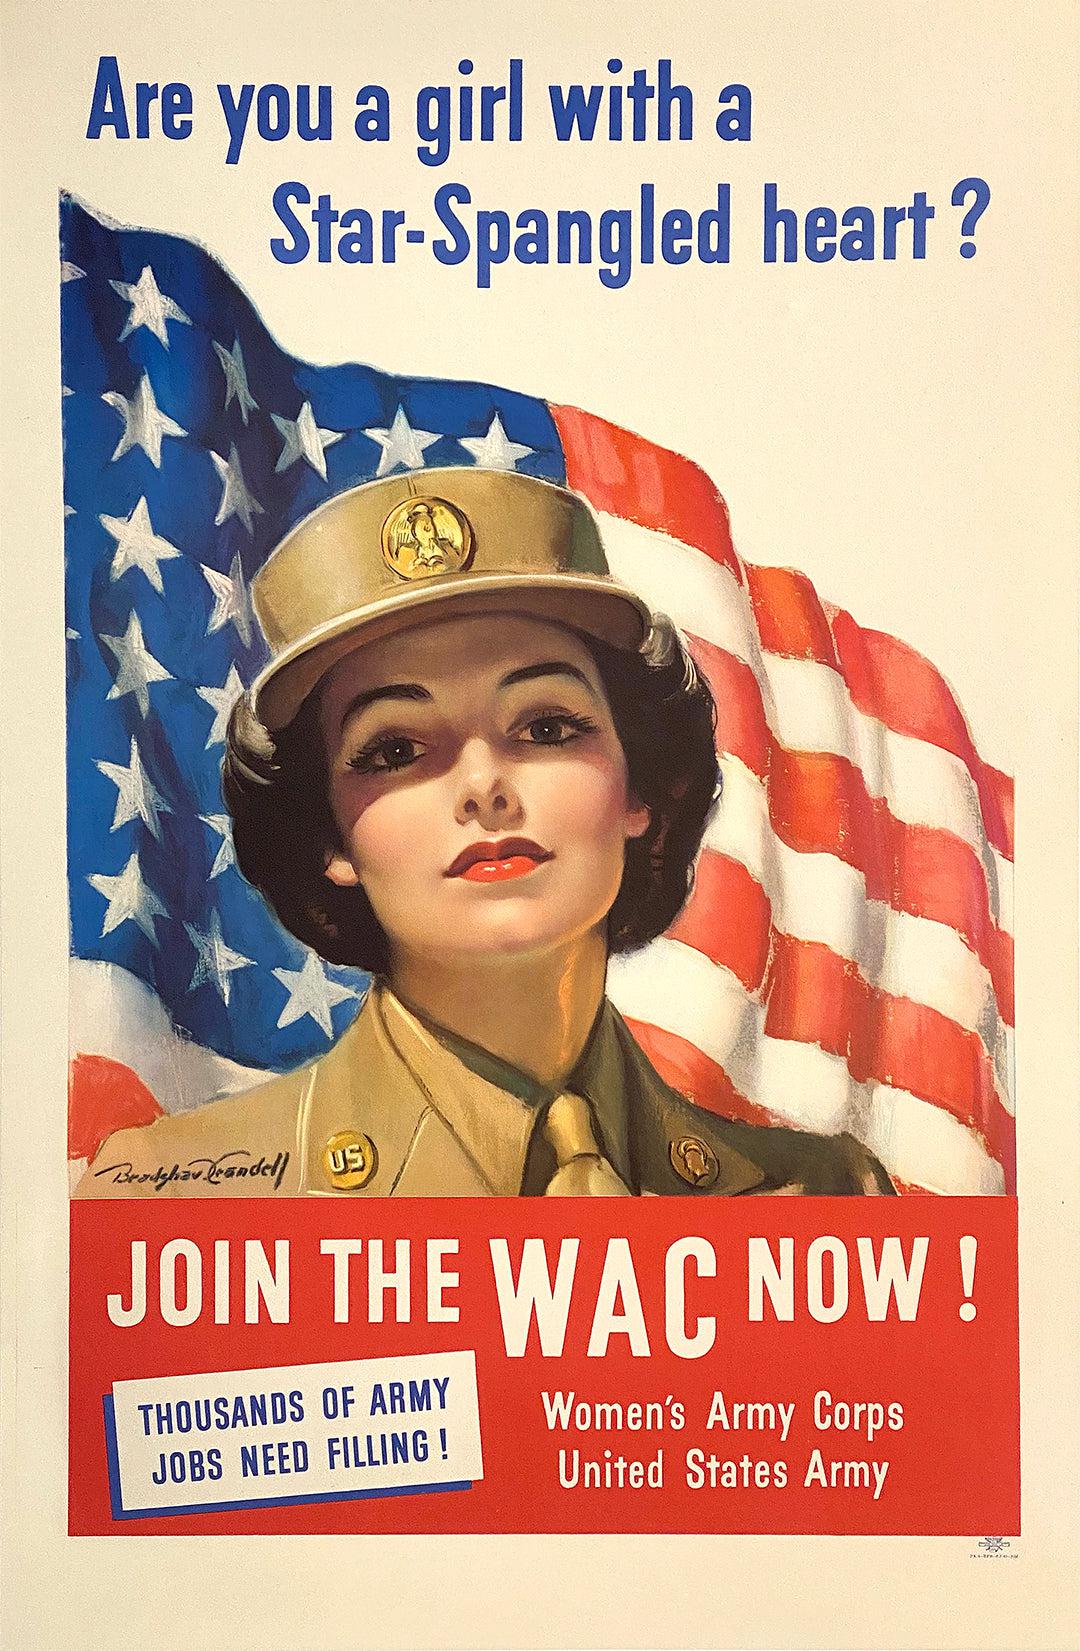 Original Vintage WAC WWII Poster Are You a Girl with a Star Spangled Heart by Crandell 1943